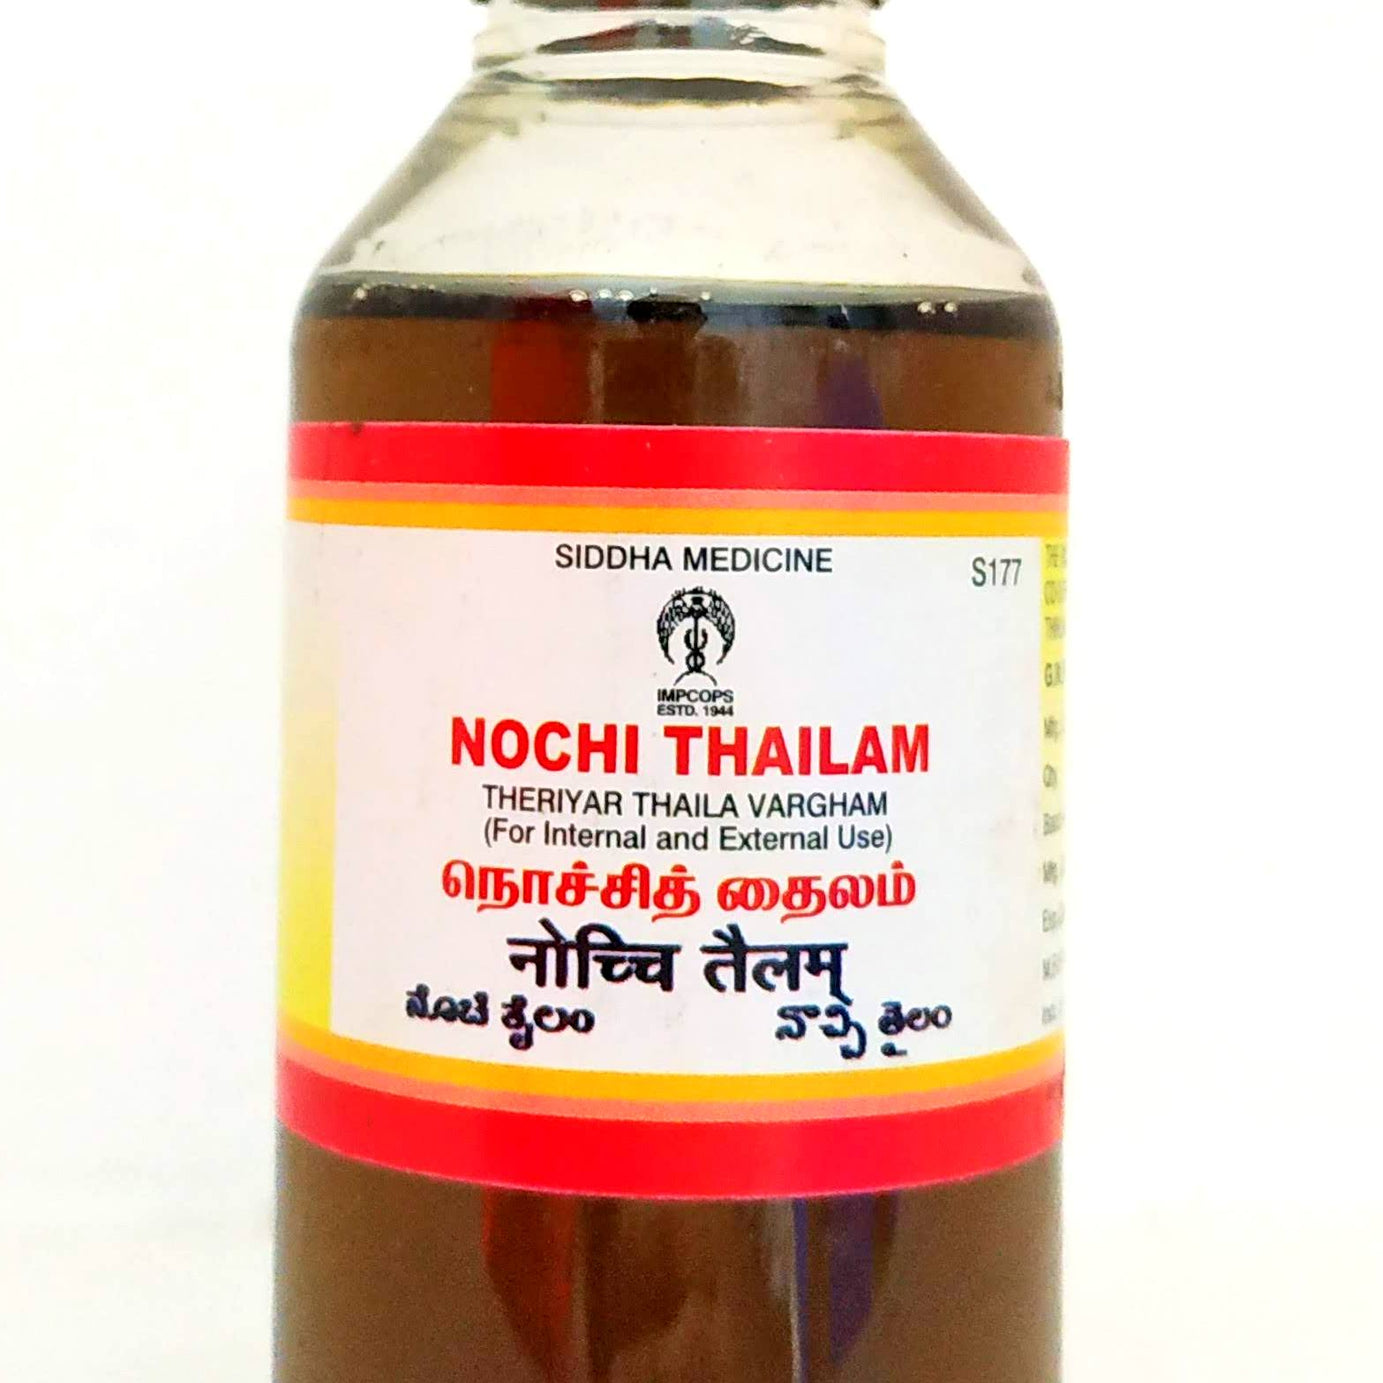 Shop Nochi thailam 100ml at price 113.00 from Impcops Online - Ayush Care